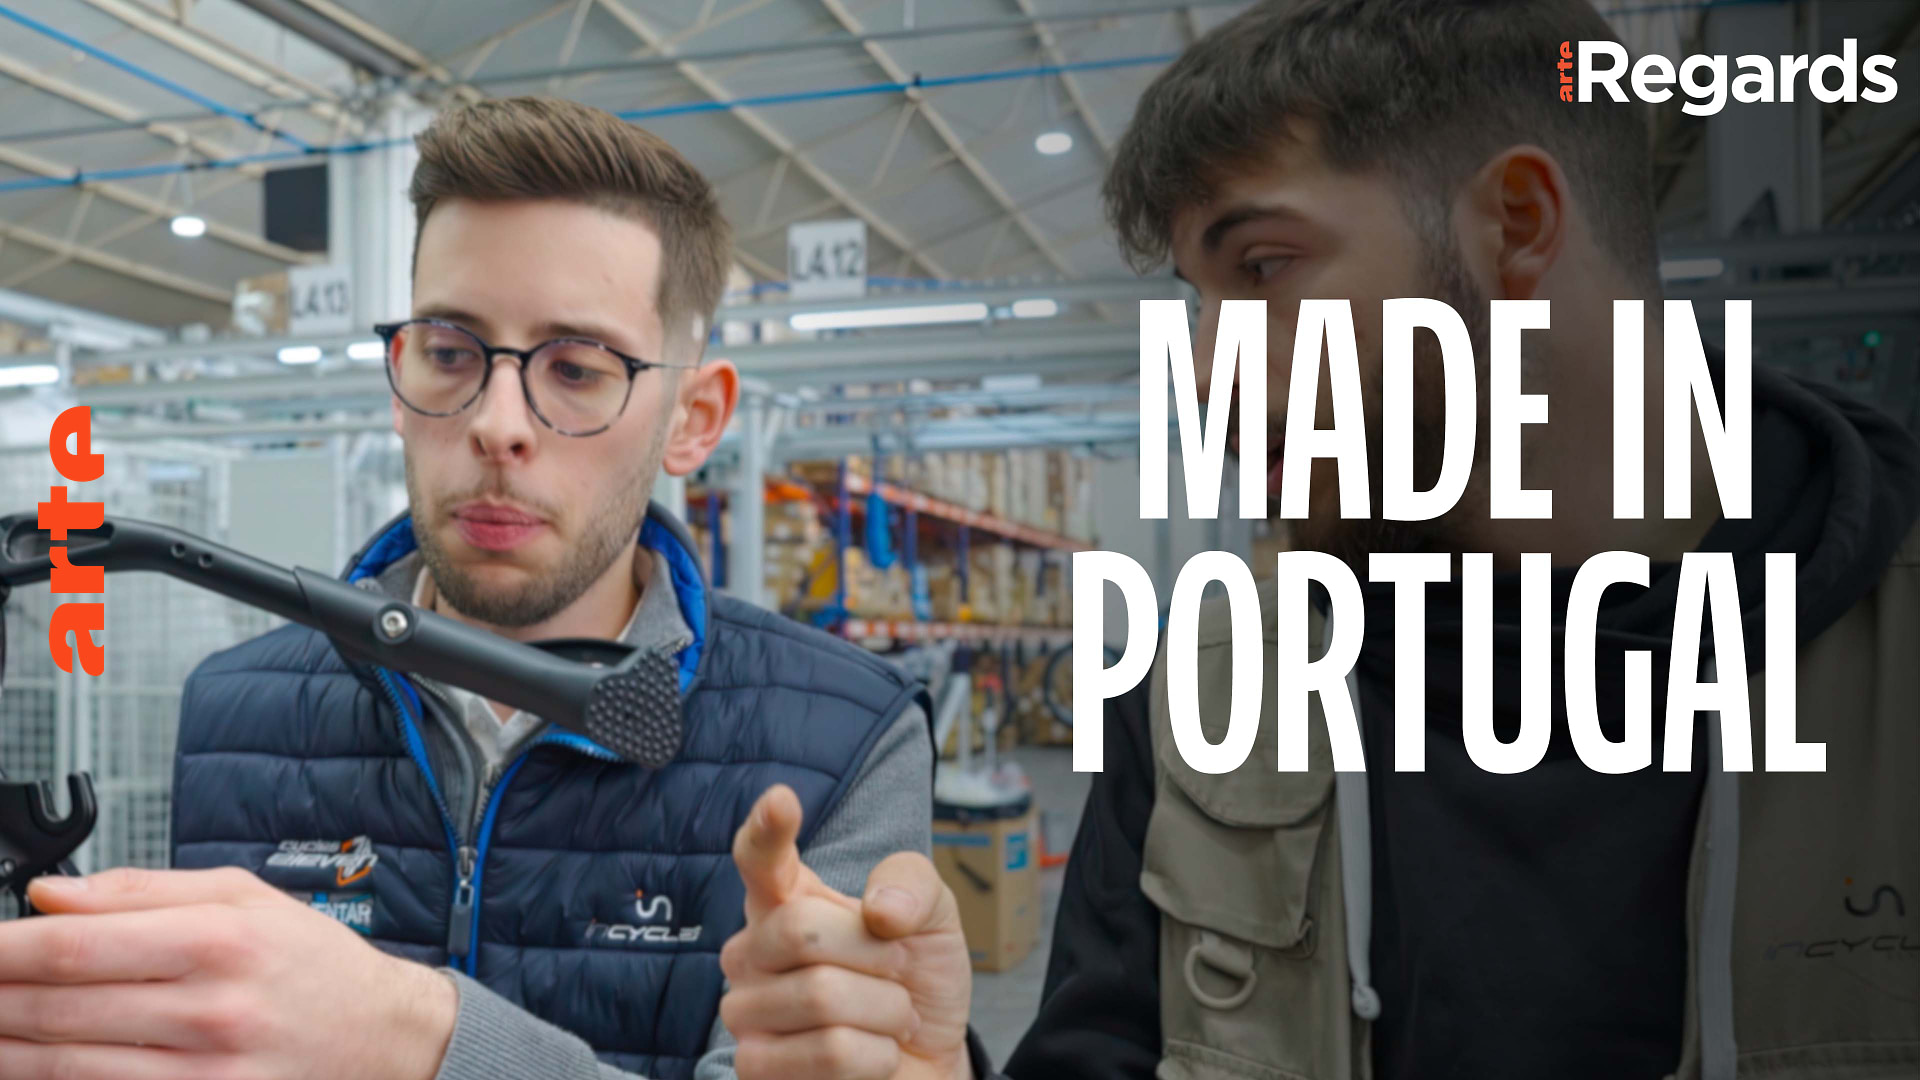 Greetings from ARTE – Made in Portugal, the thriving province – Watch the full documentary